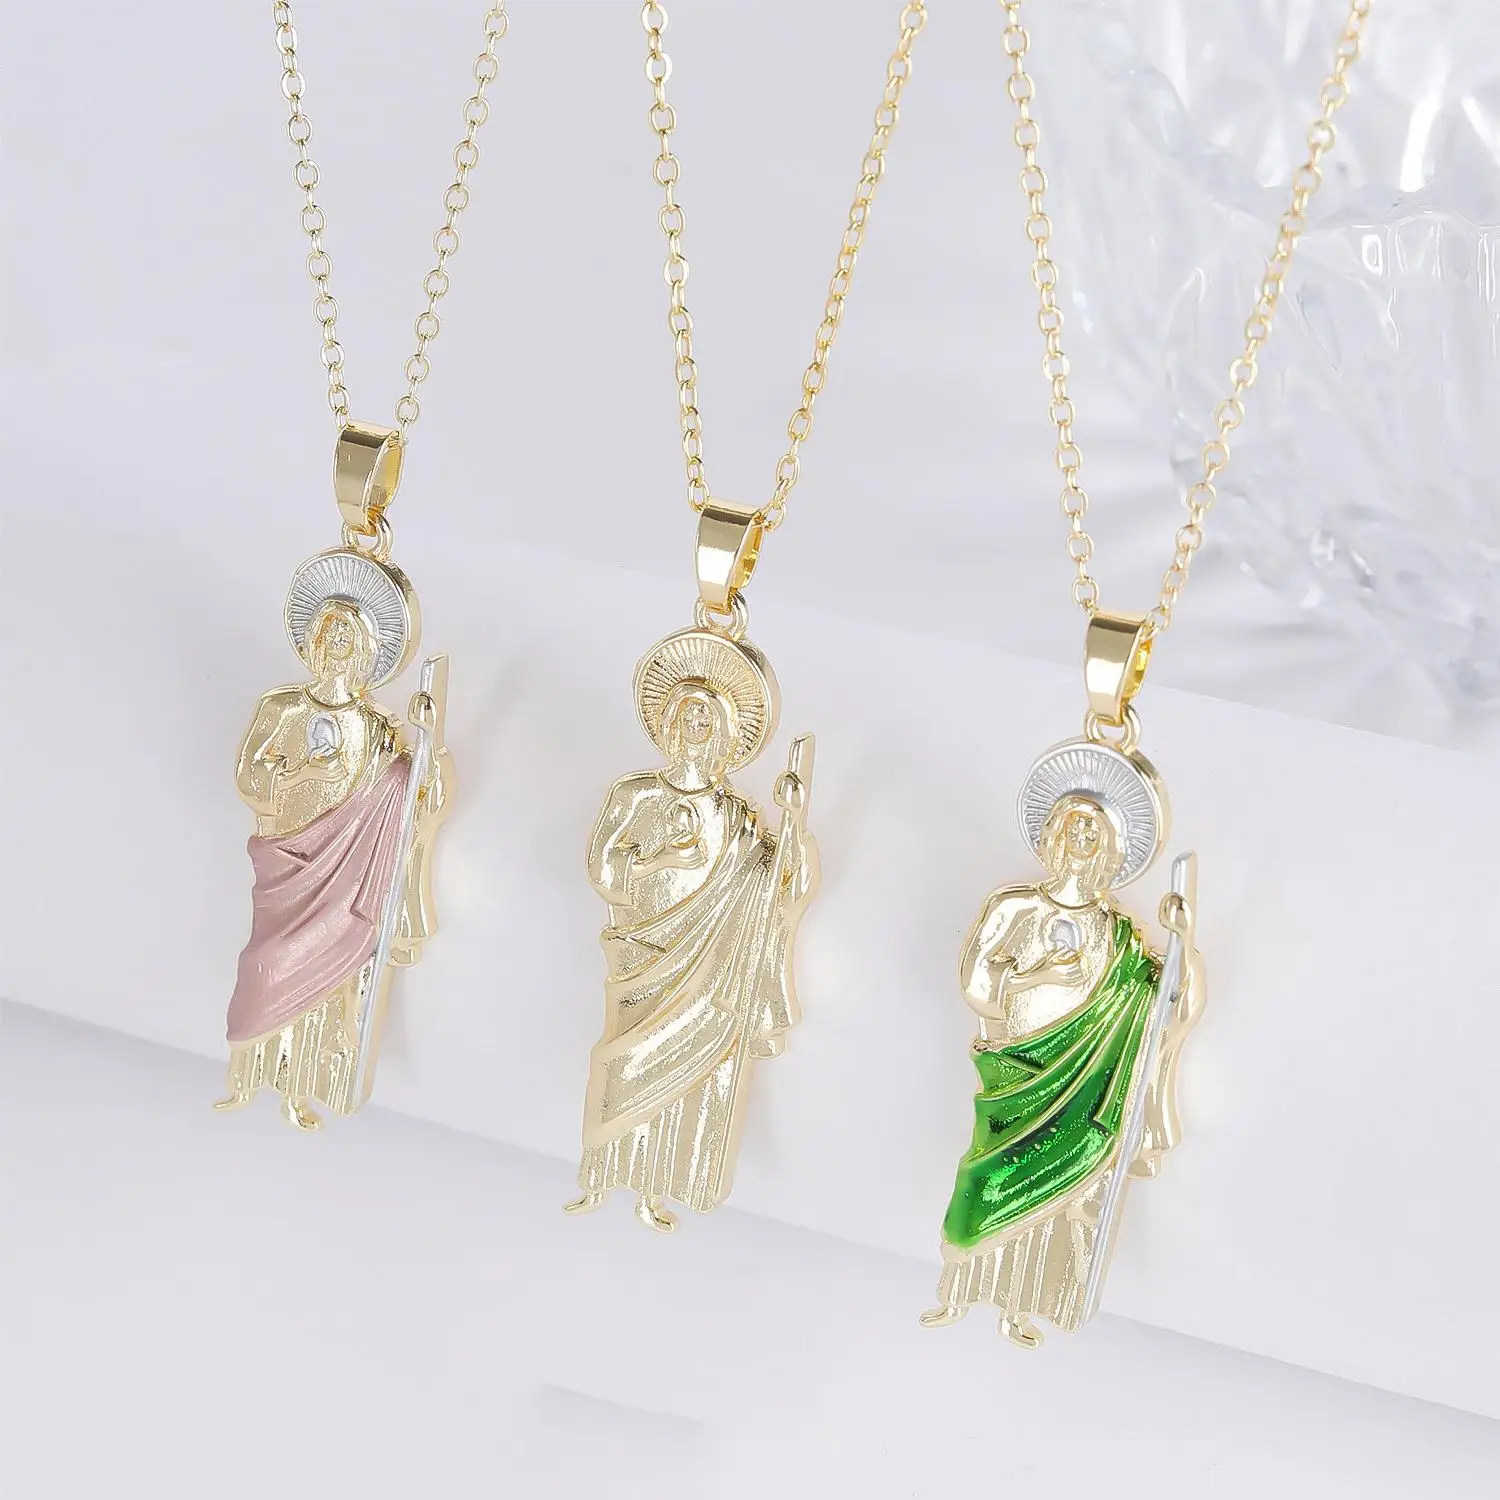 G&D Luxury Green Saint San Judas Tadeo Medalla Cadena Gold Plated Jude Pendant Necklace For Women Jewelry Party Birthday Gift